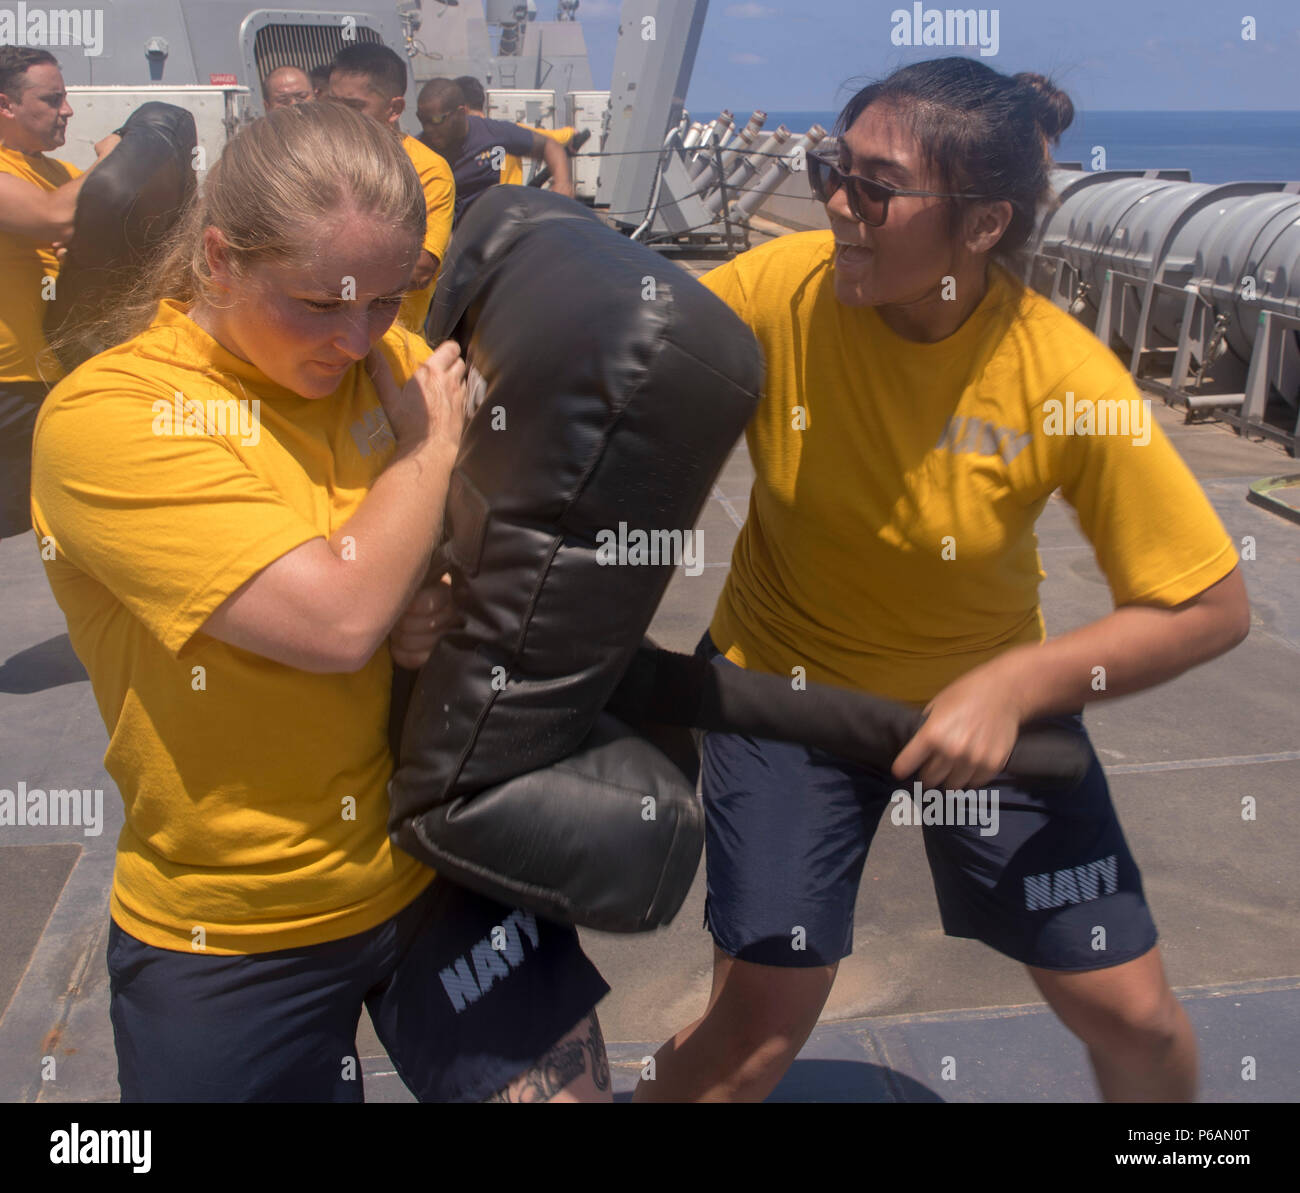 180621-N-GR168-0116 MEDITERRANEAN SEA (June 21, 2018) Ensign Genelle Arandia, from Gainesville, Florida, and Ensign Jenna Padgett, from Live Oak, Florida, practice proper baton use during security reaction force basic training aboard the San Antonio-class amphibious transport dock ship USS New York (LPD 21) June 21, 2018. New York, homeported in Mayport, Florida, is conducting naval operations in the U.S. 6th Fleet area of operations in support of U.S. national security interests in Europe and Africa.  (U.S. Navy photo by Mass Communication Specialist 2nd Class Lyle Wilkie/Released) Stock Photo